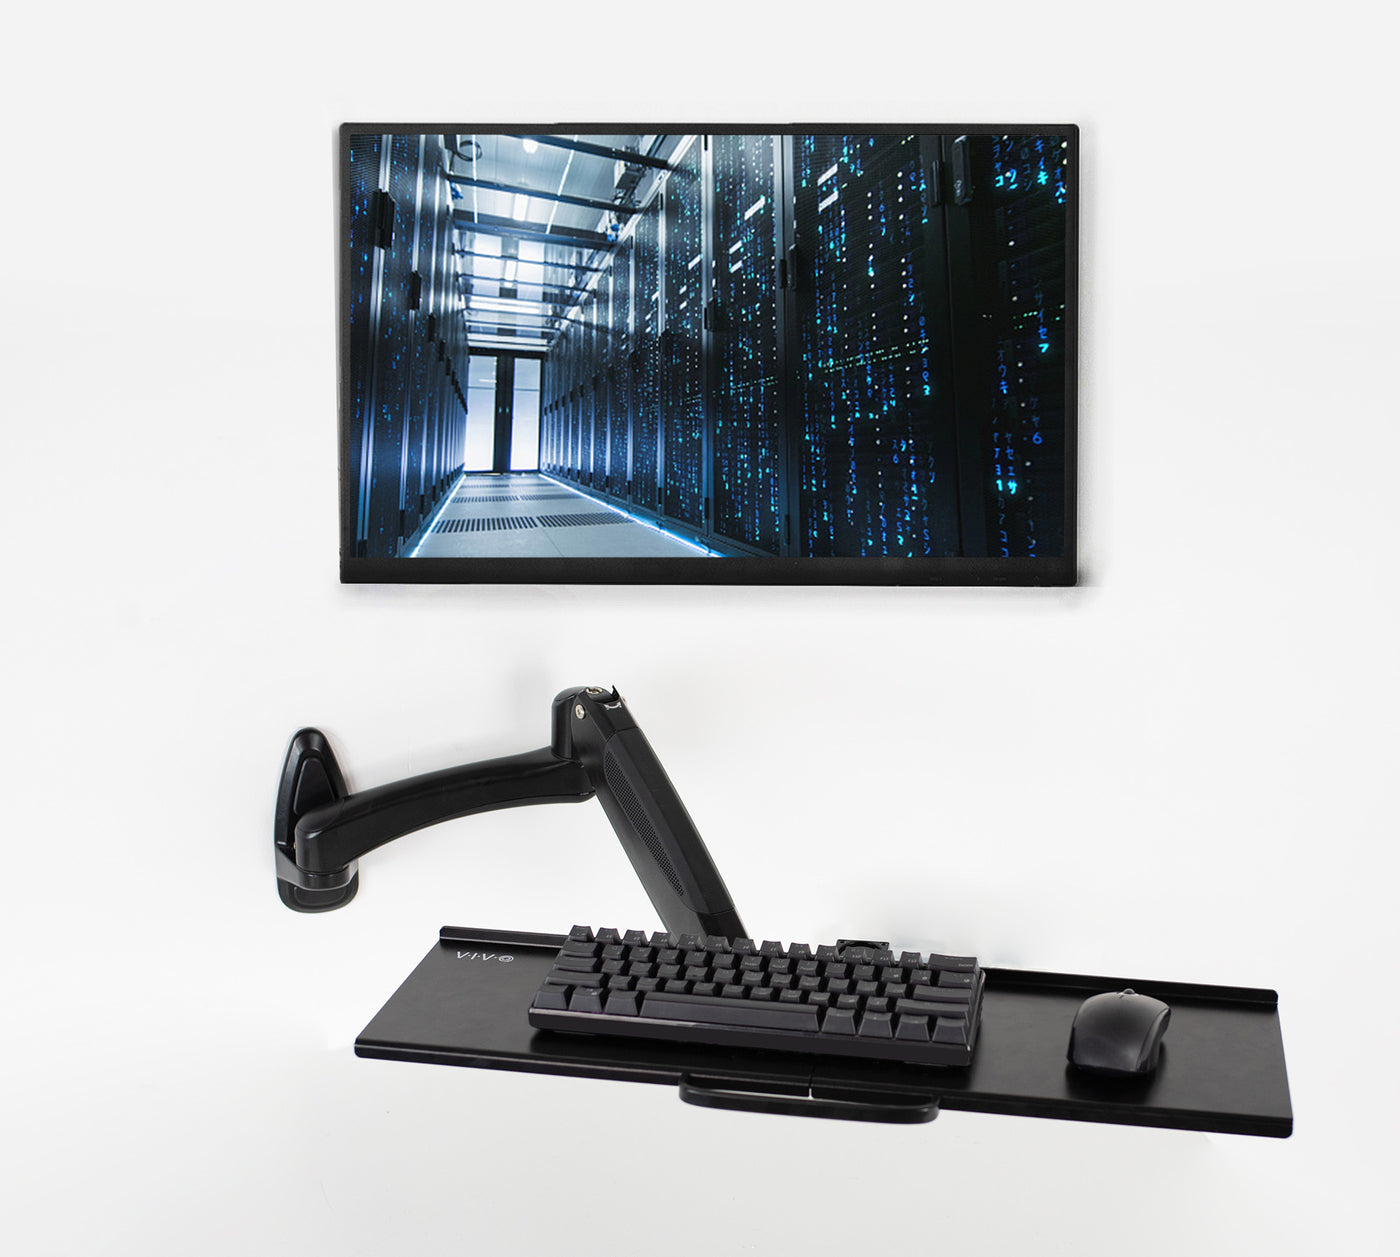 Wall mount keyboard tray supporting a mouse and keyboard below a wall-mounted monitor.